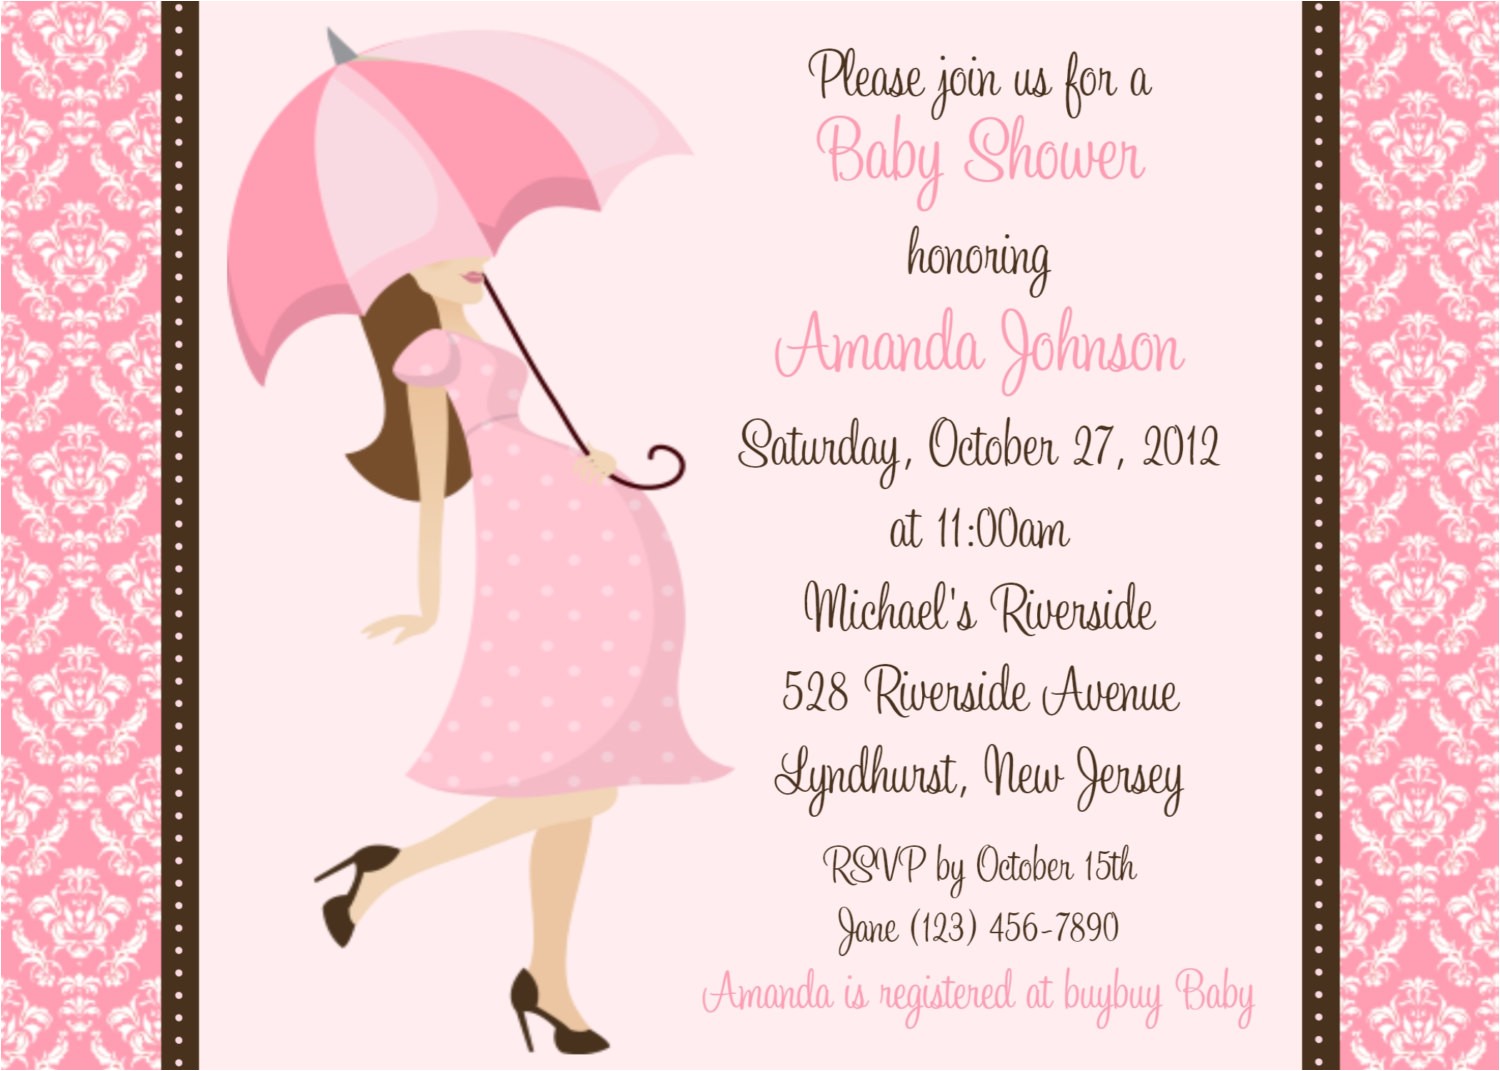 Baby Shower Invites for A Girl Baby Shower Invitation Wording Fashion & Lifestyle